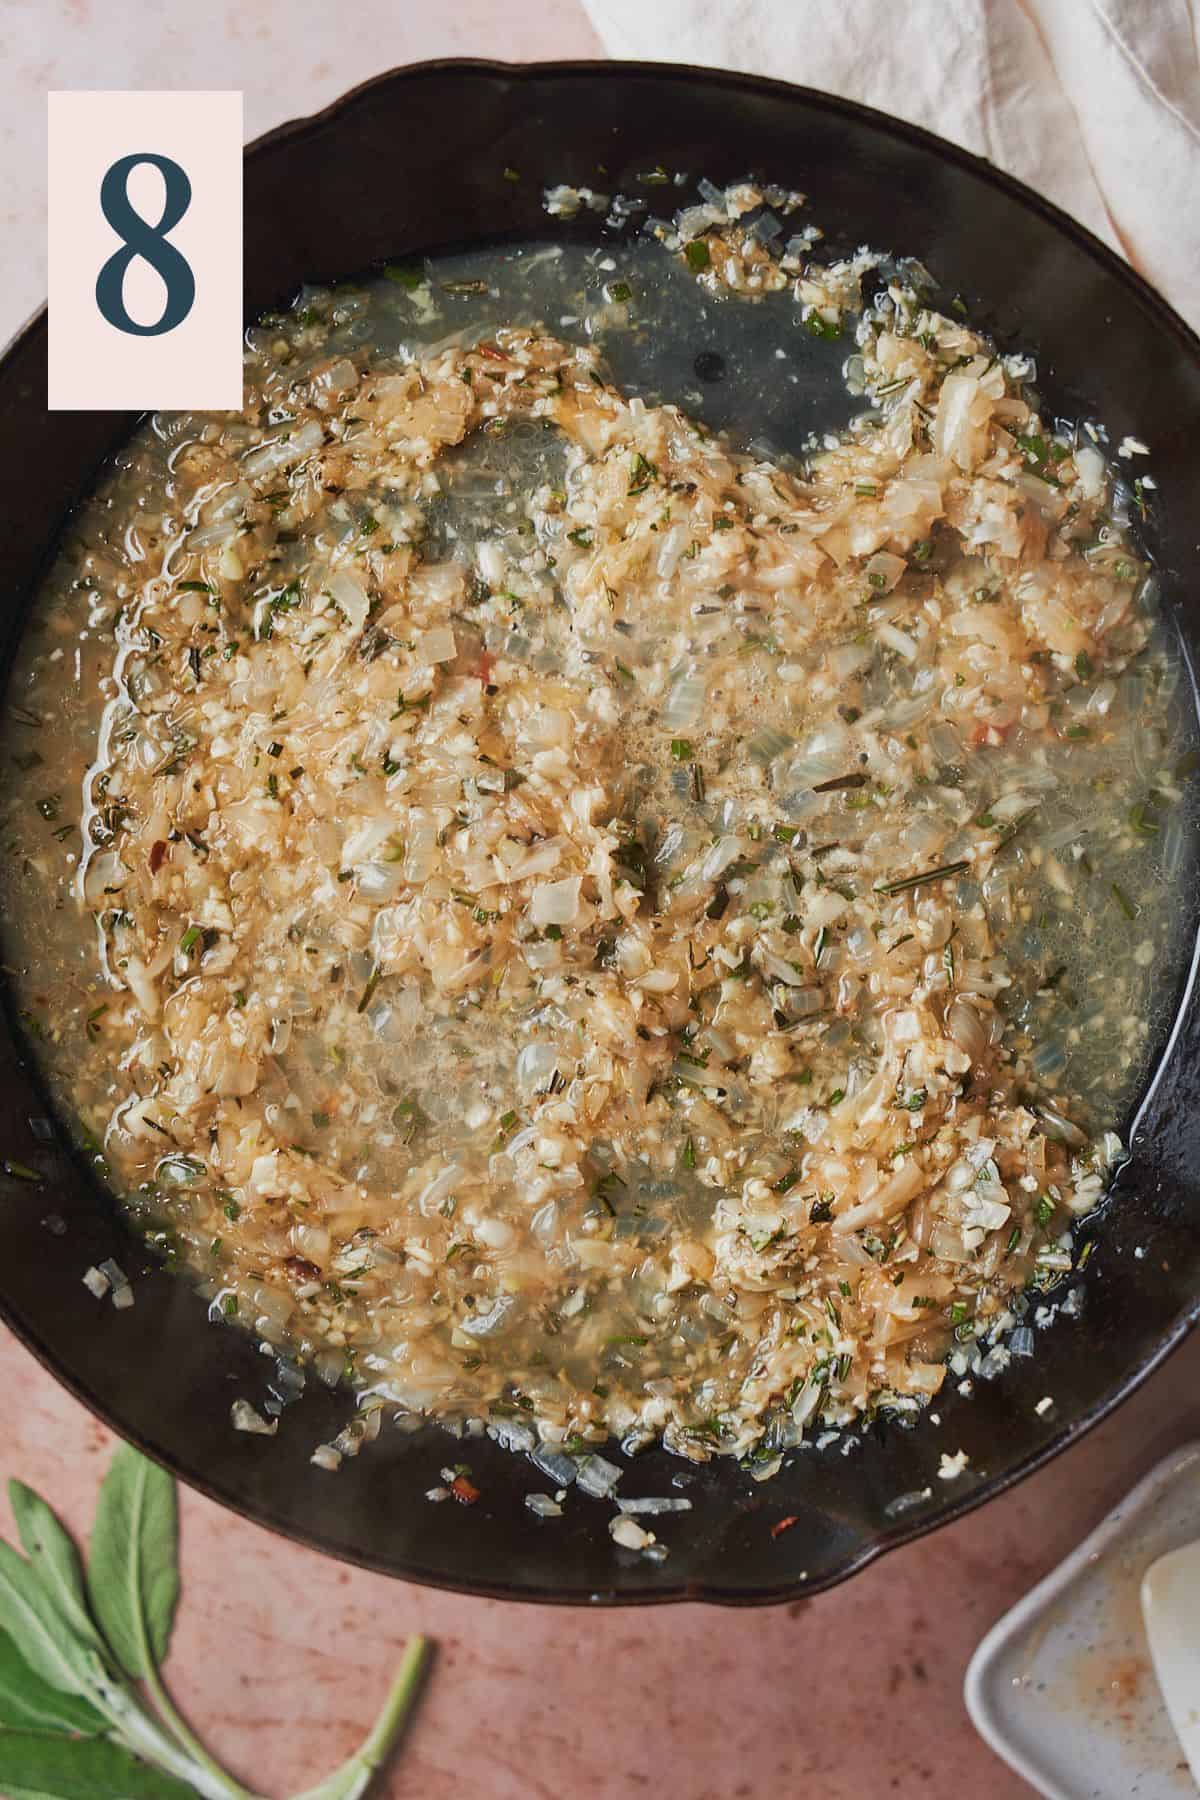 Cooked onions, garlic, and herbs in a skillet with chicken broth. 